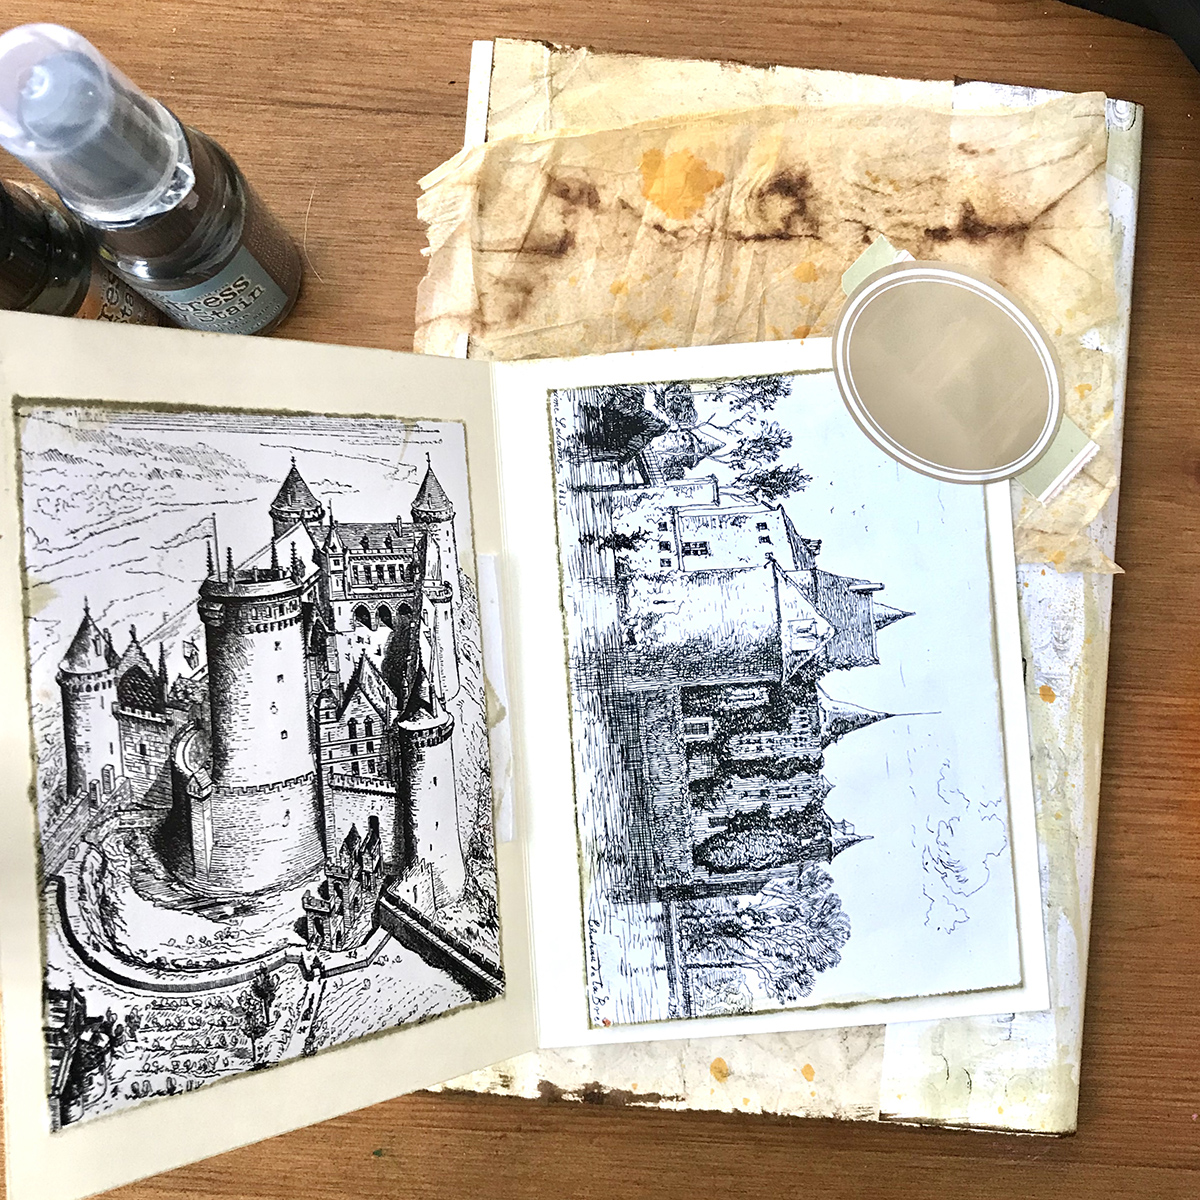 Junk journal pages with castles